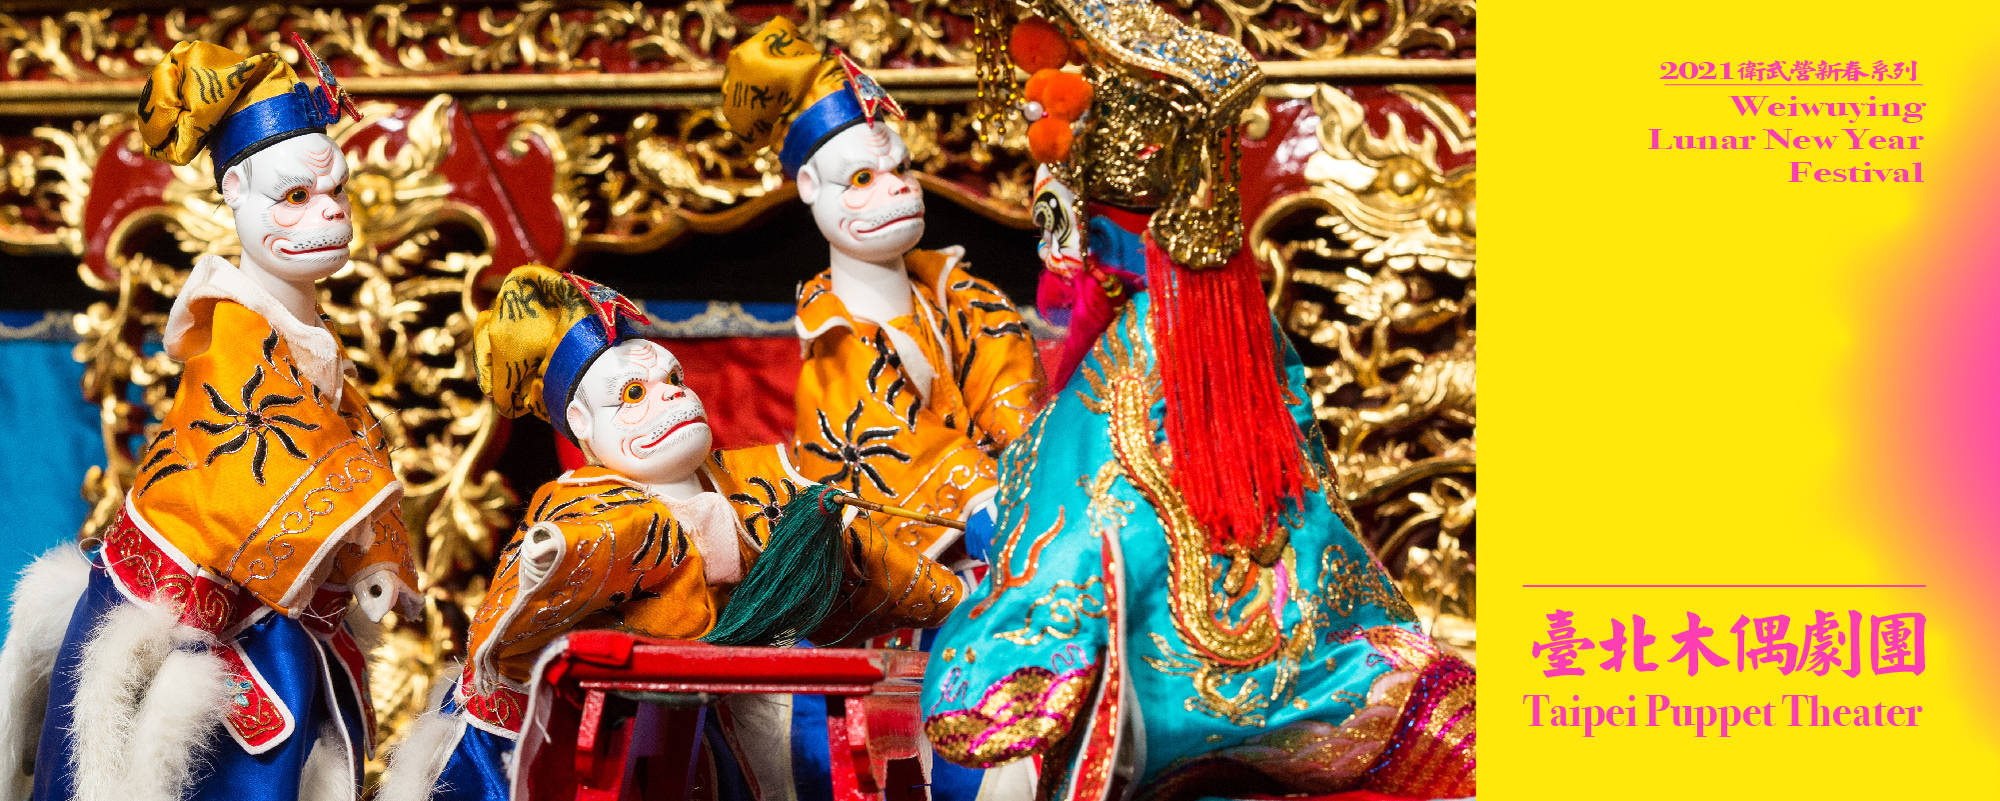 【2021 Weiwuying Lunar New Year Festival】Taipei Puppet Theater - Joy and Lively